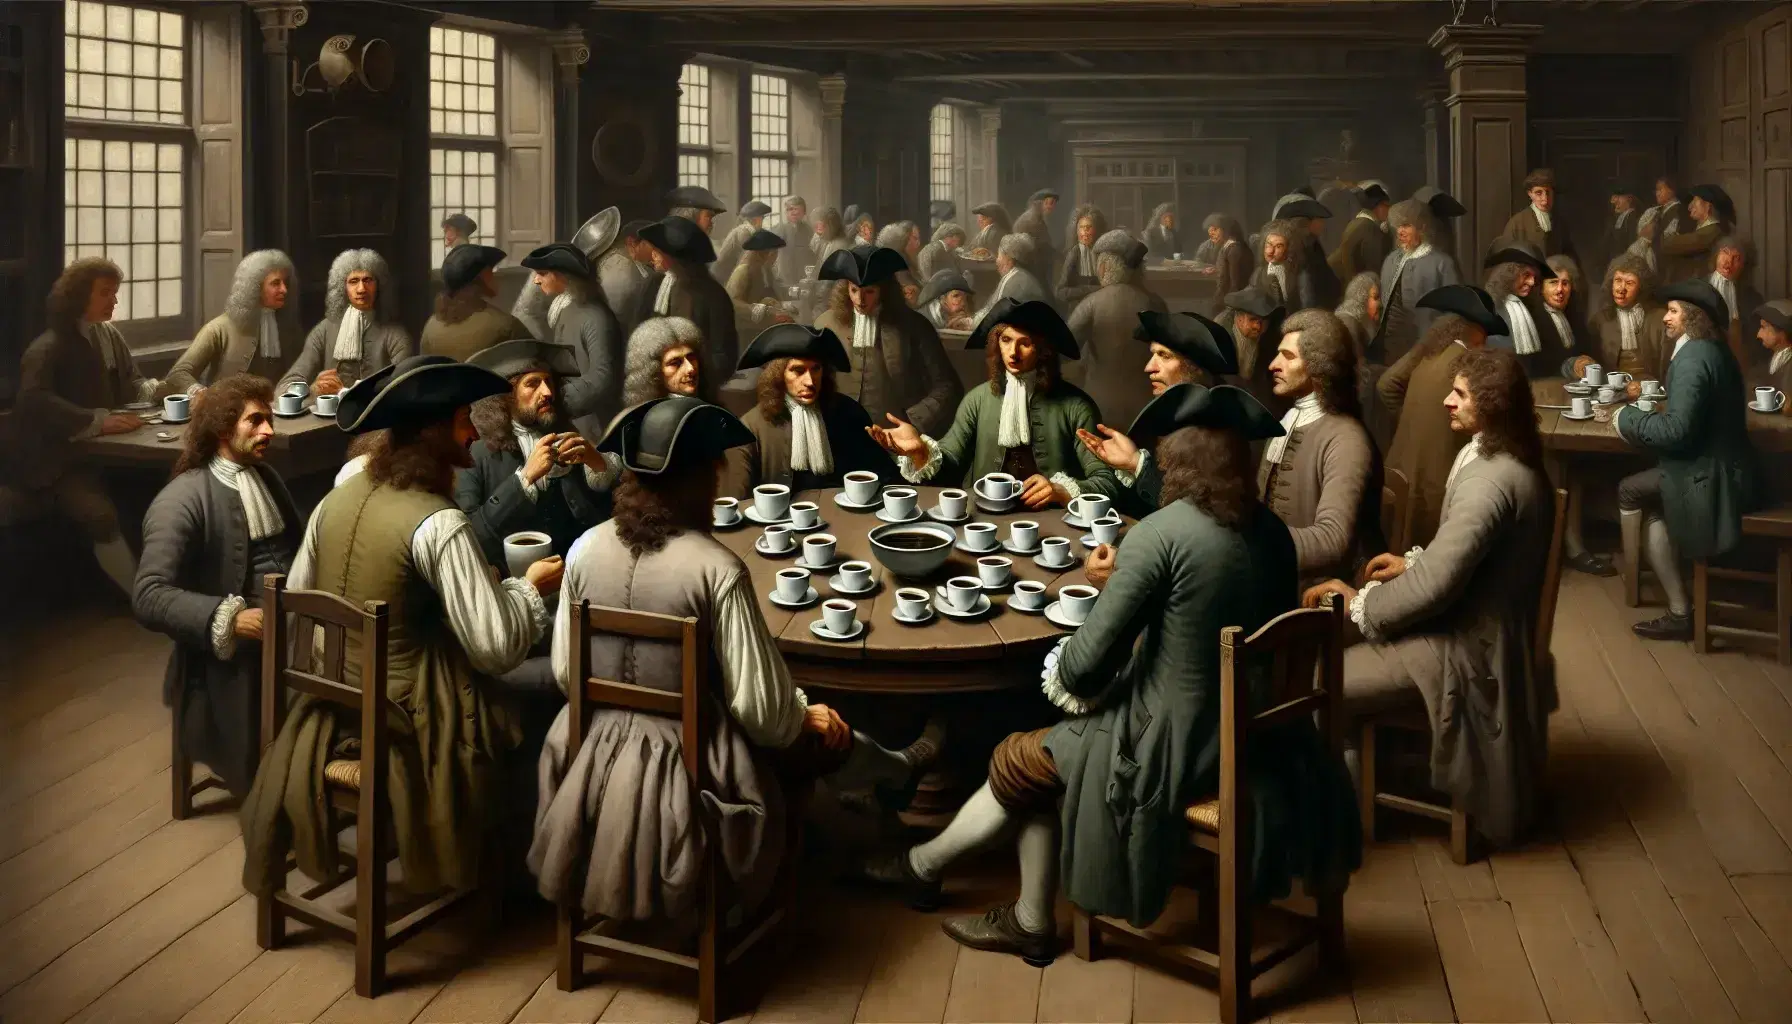 17th-century coffee house interior with men in waistcoats and tricorn hats engaging in conversation around a table with porcelain cups.